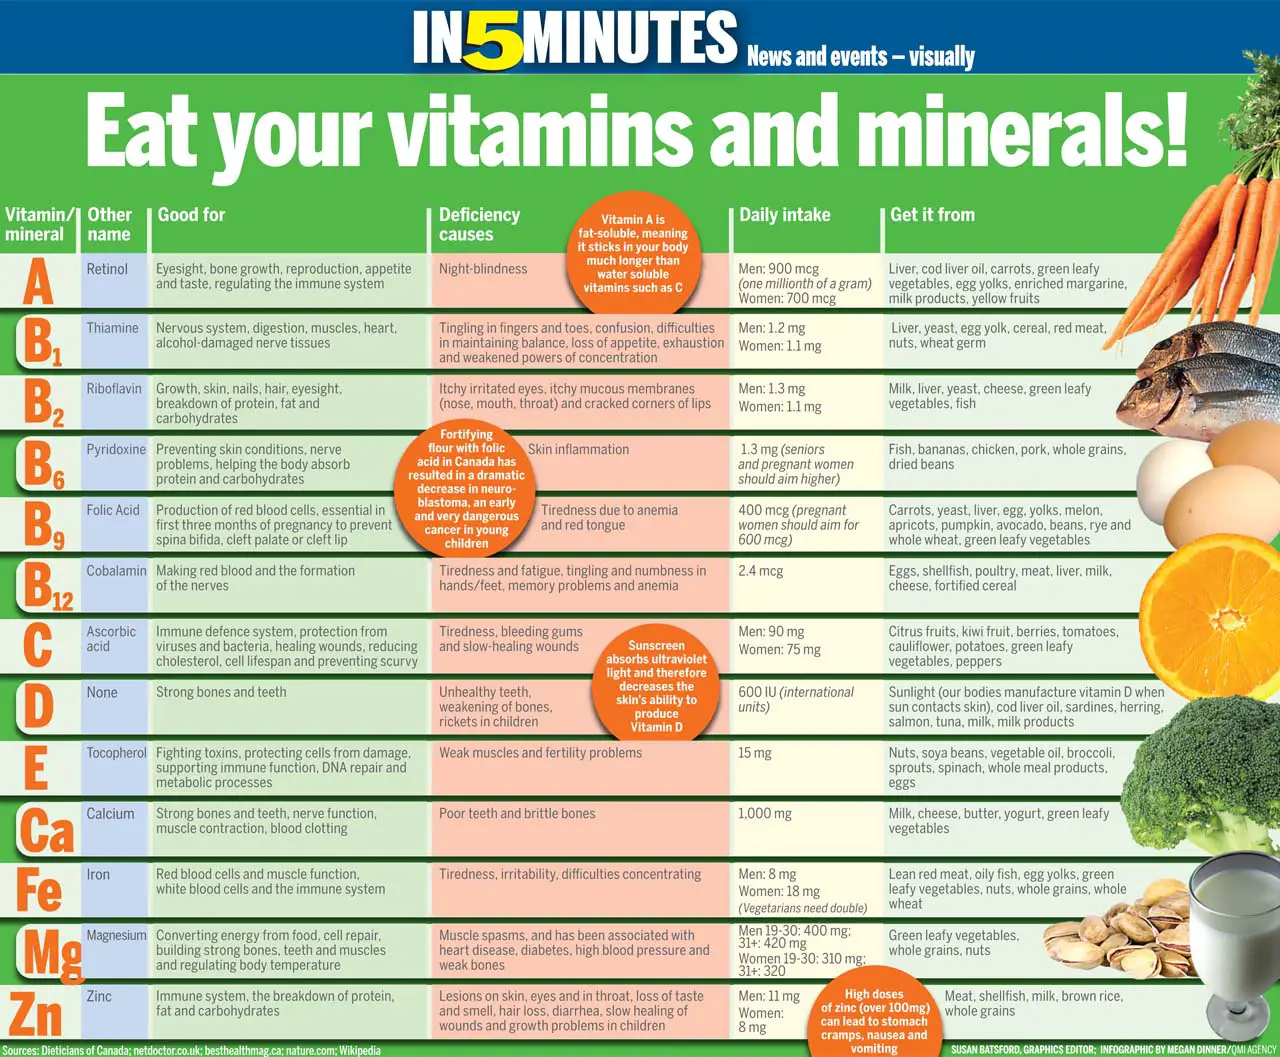 Requirement of Essential Vitamins and Minerals